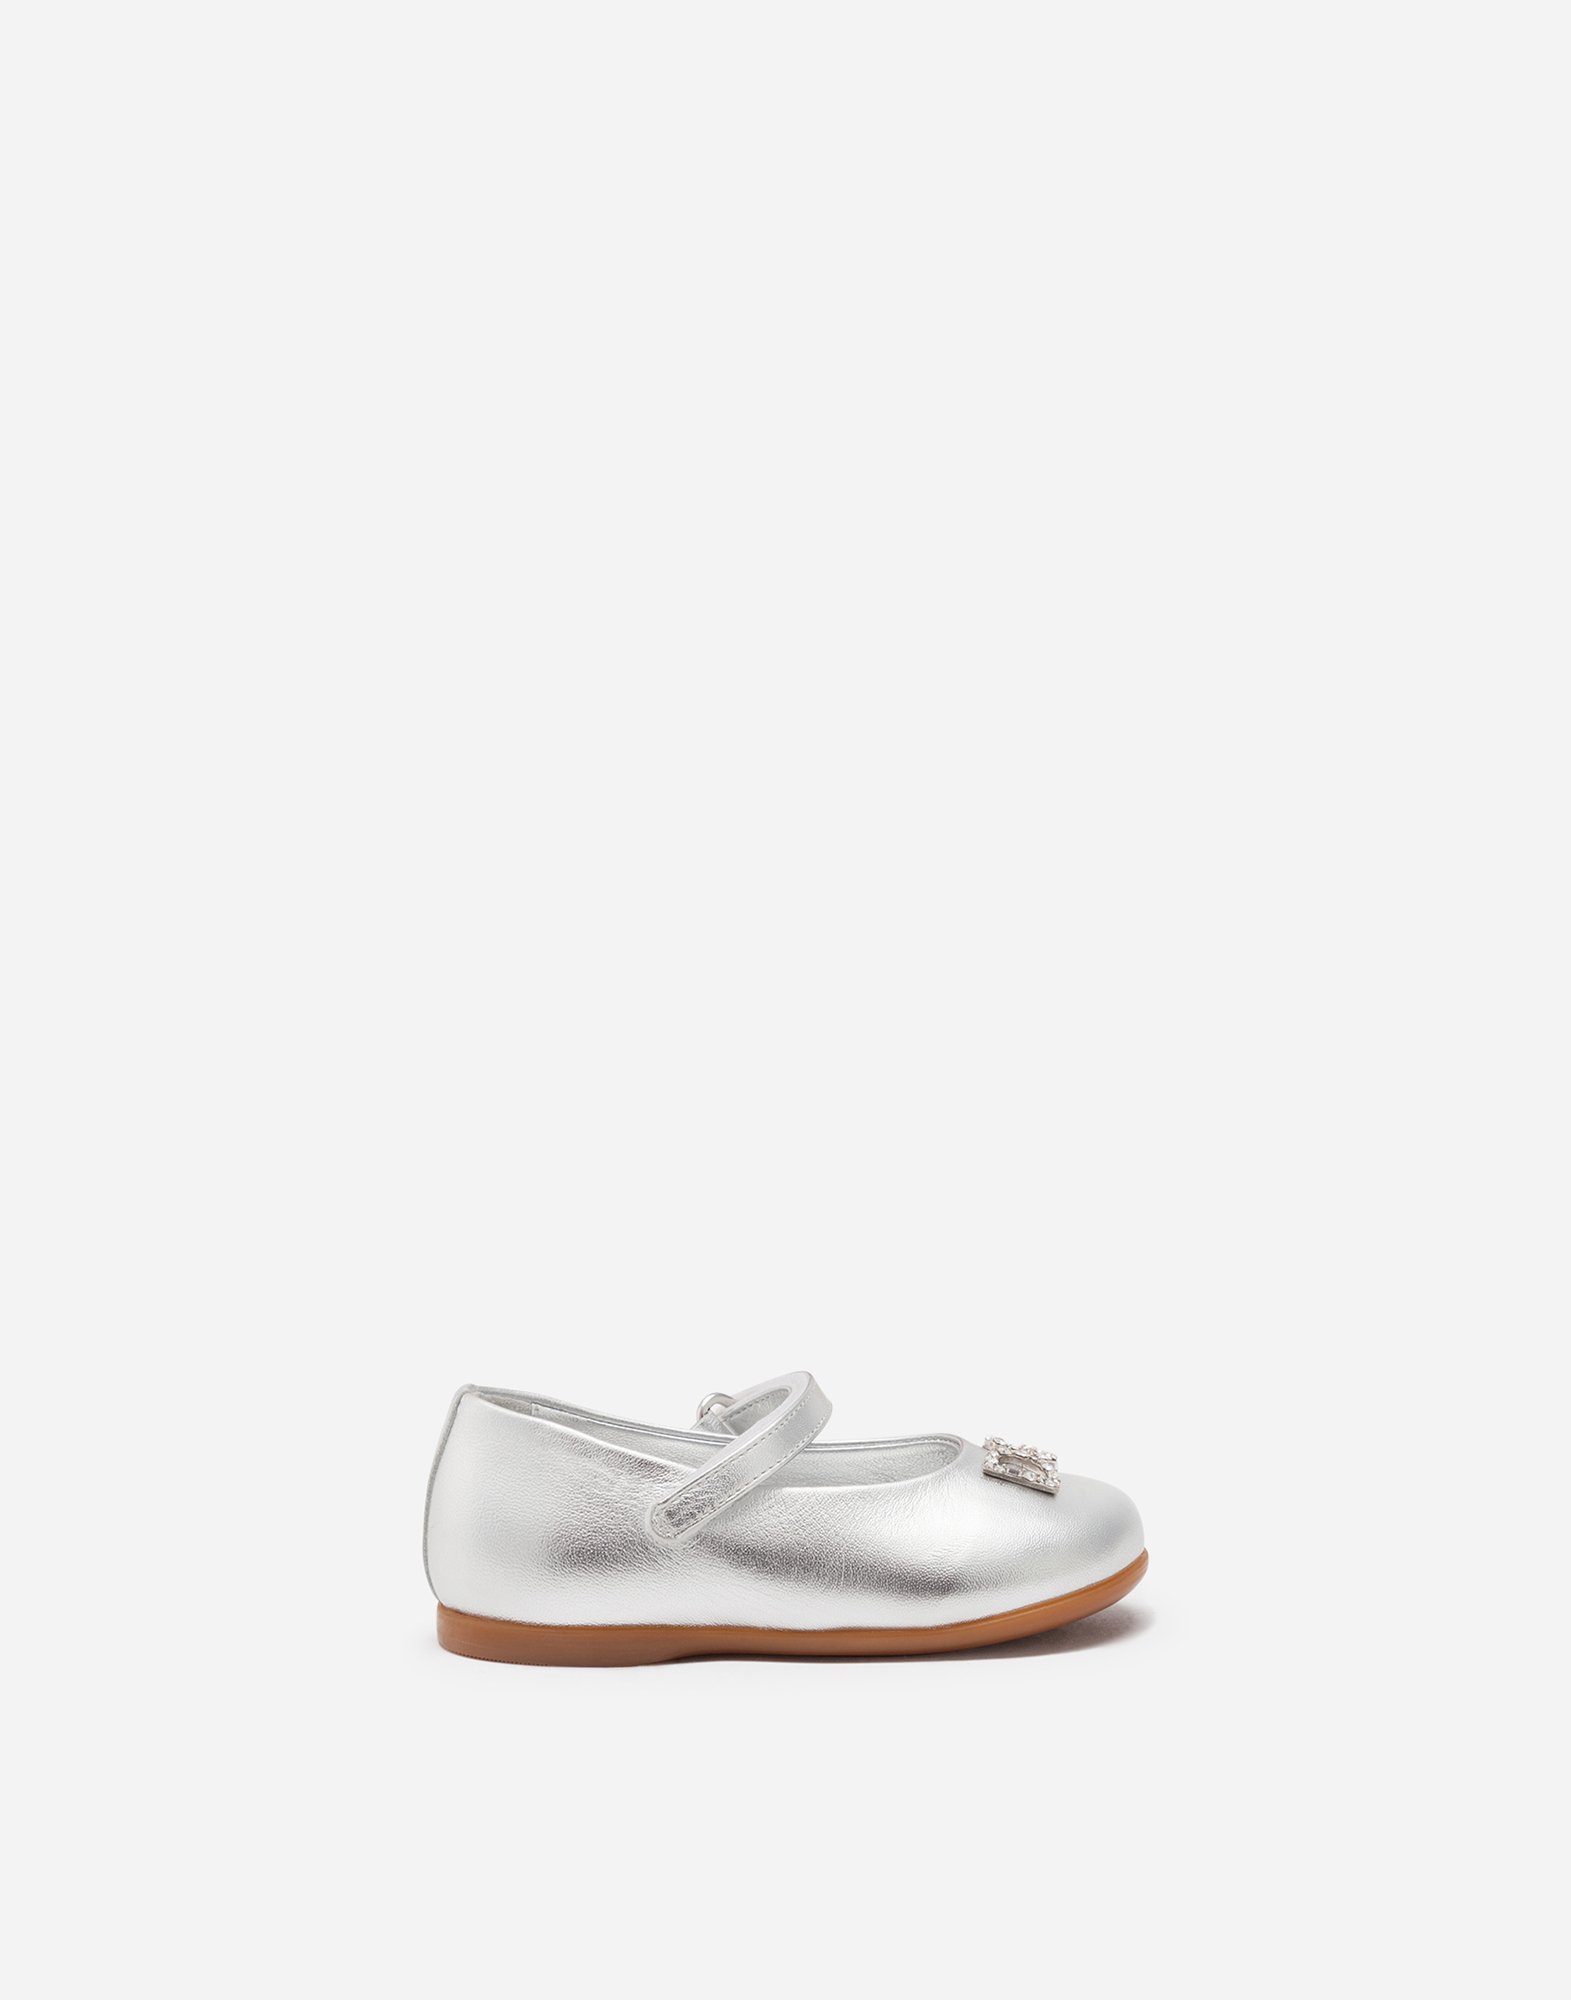 Foiled nappa leather Mary Janes in Silver